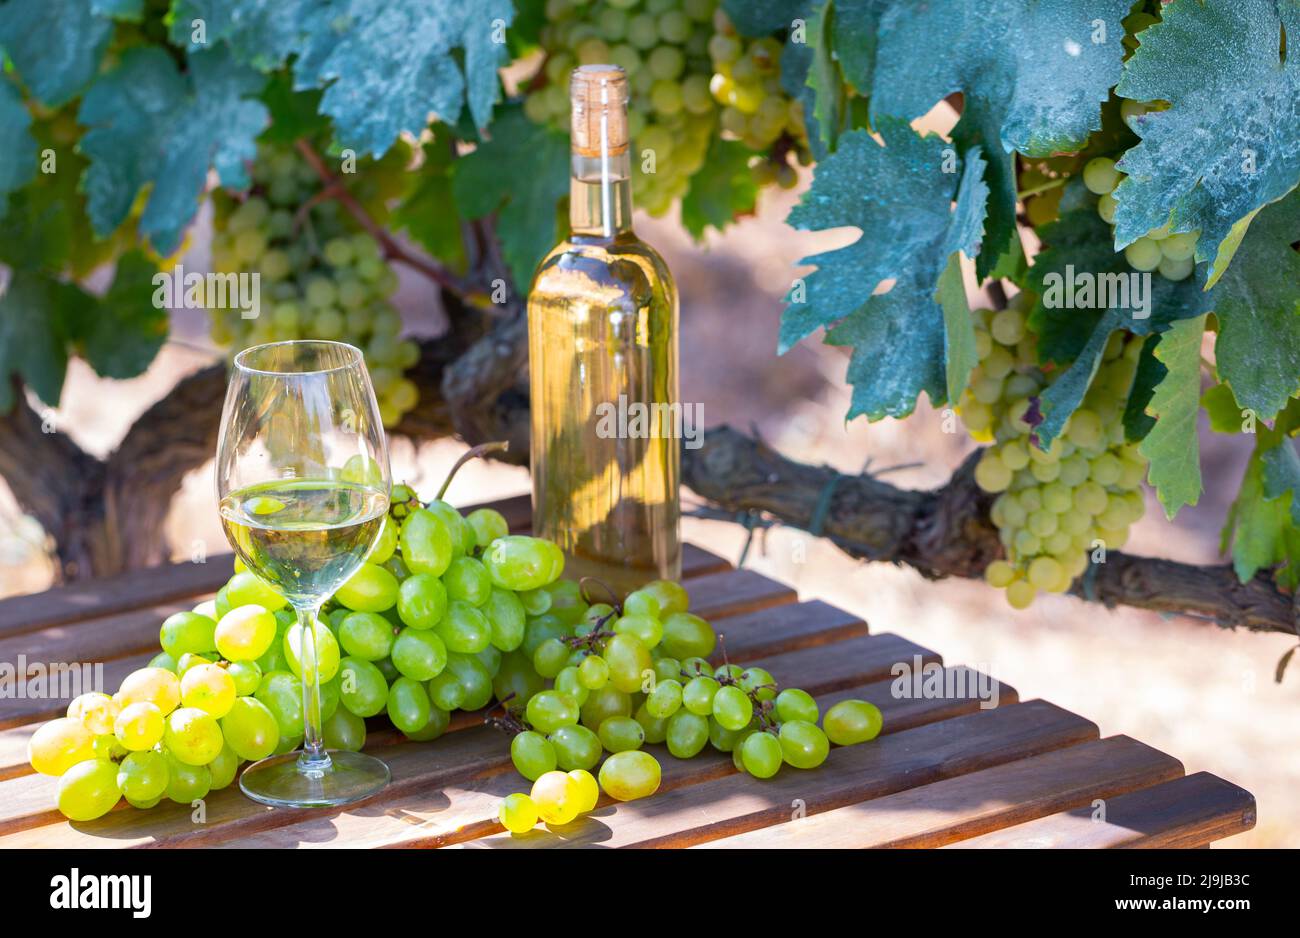 Still life with bottle of white wine, glass of wine and grapes Stock Photo